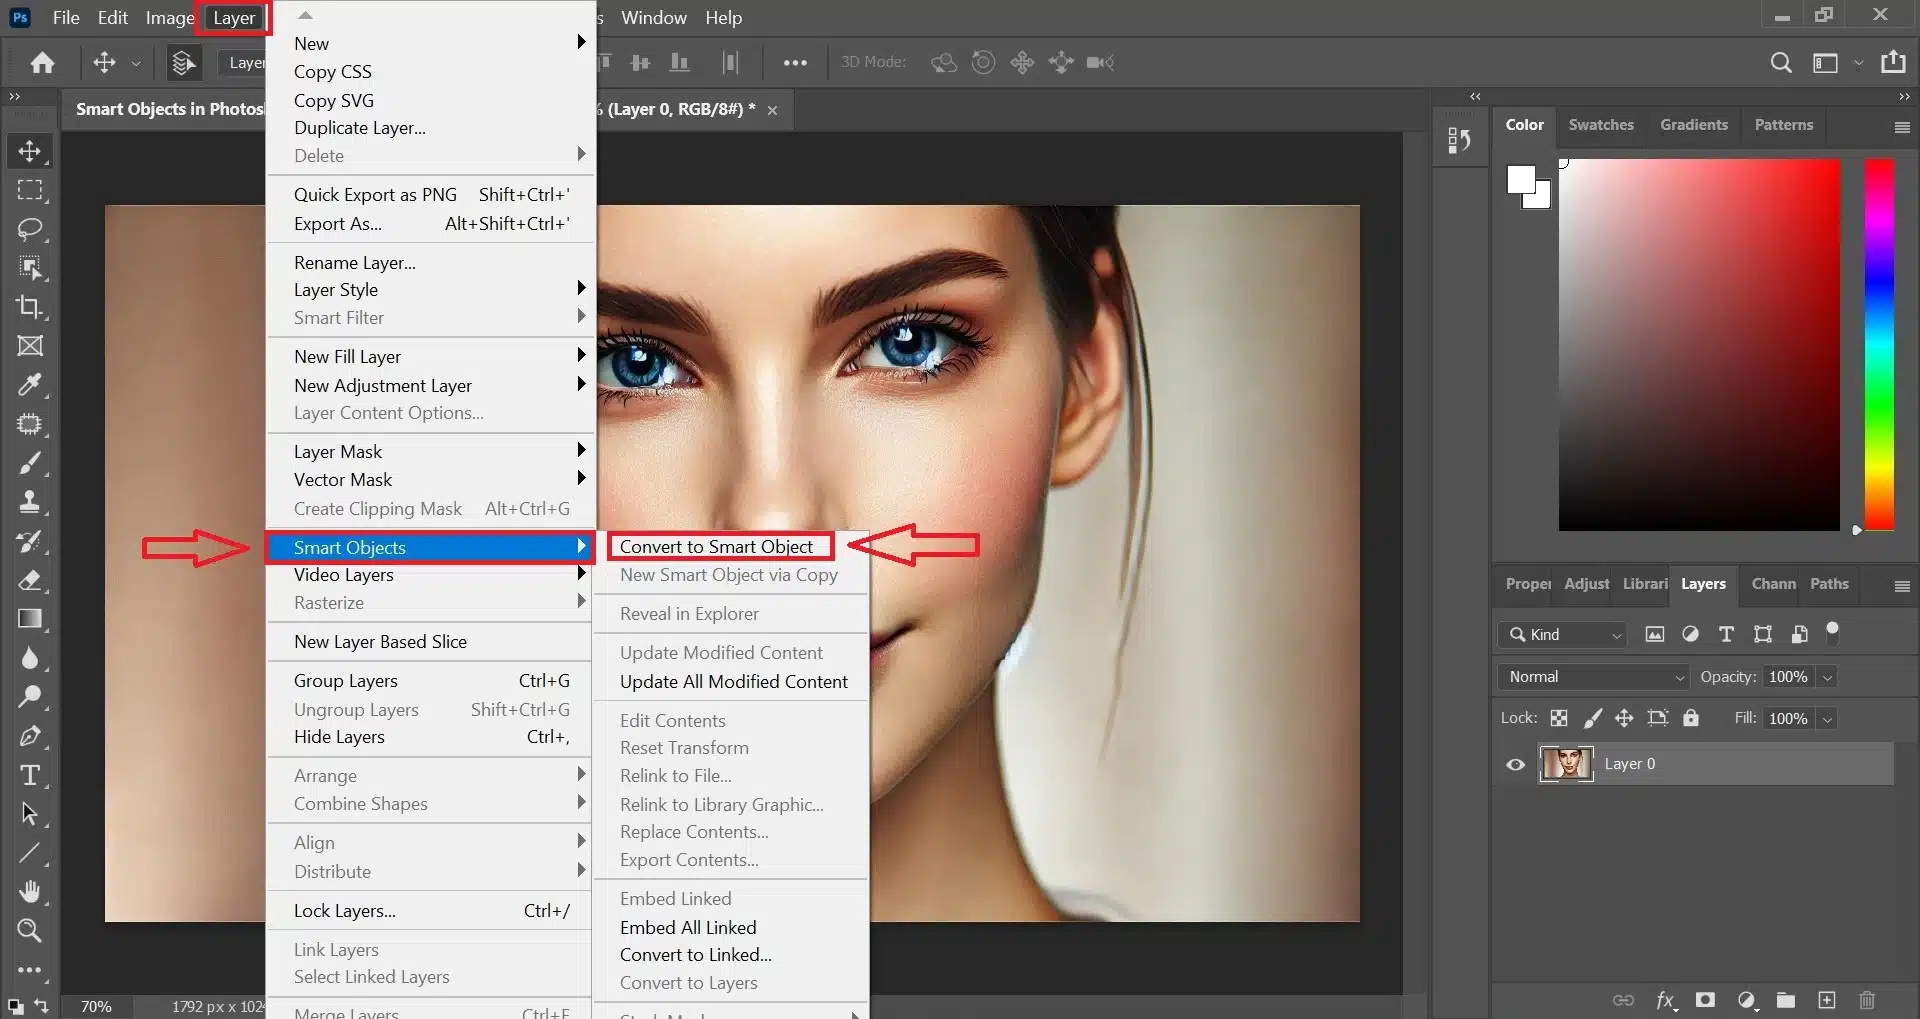 Photoshop interface showing how to convert a layer to a smart object, with a close-up of a woman's face in the background.